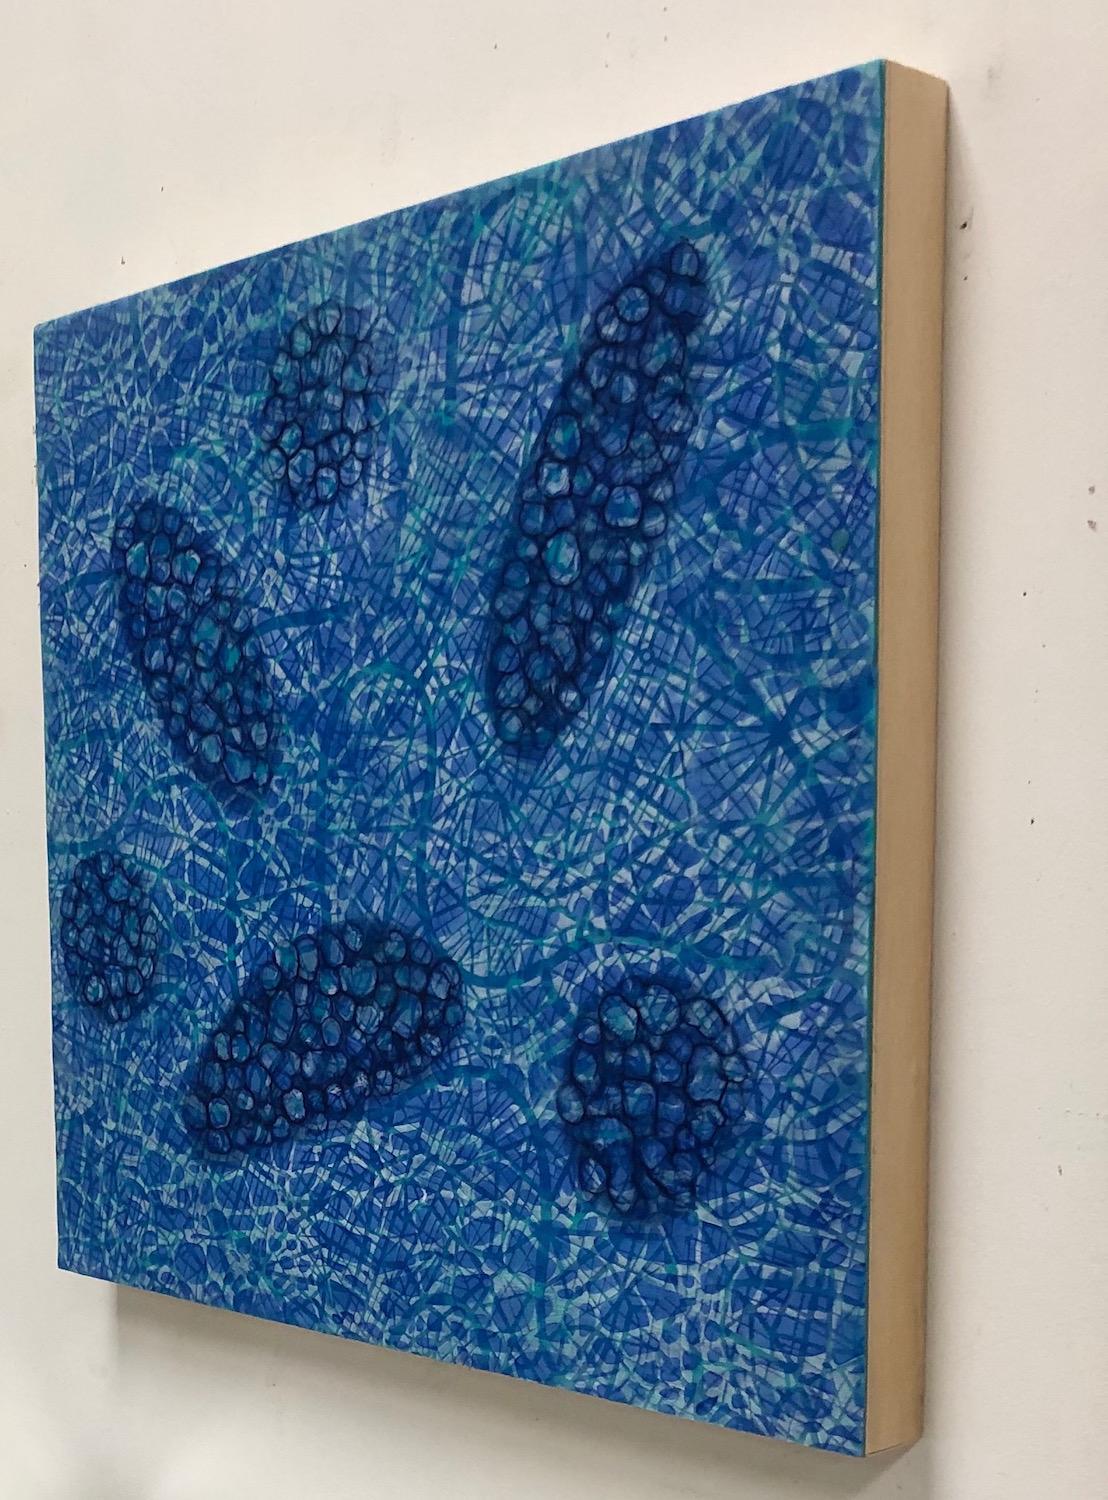 Kay Hartung’s “Bio Patterns 11” is a 20 x 20 x 1.5 inch encaustic painting composed of transparent layers depicting microscopic forms on a richly patterned background. In colors of blues, turquoise and white, the transparent layers create a sense of